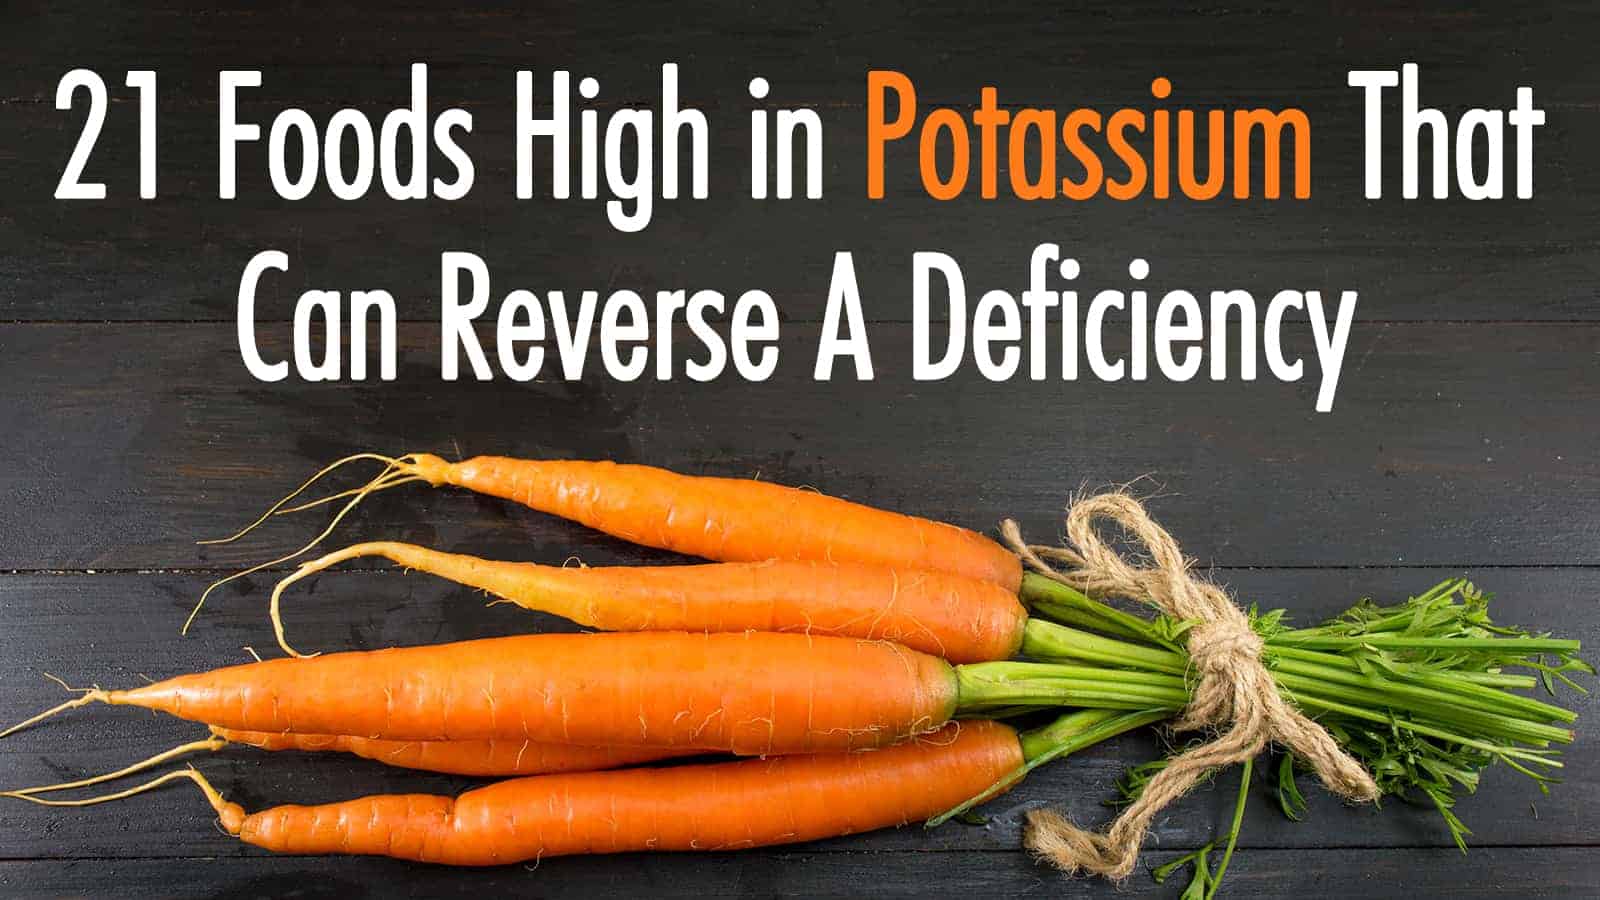 21 Foods High in Potassium That Can Reverse A Deficiency